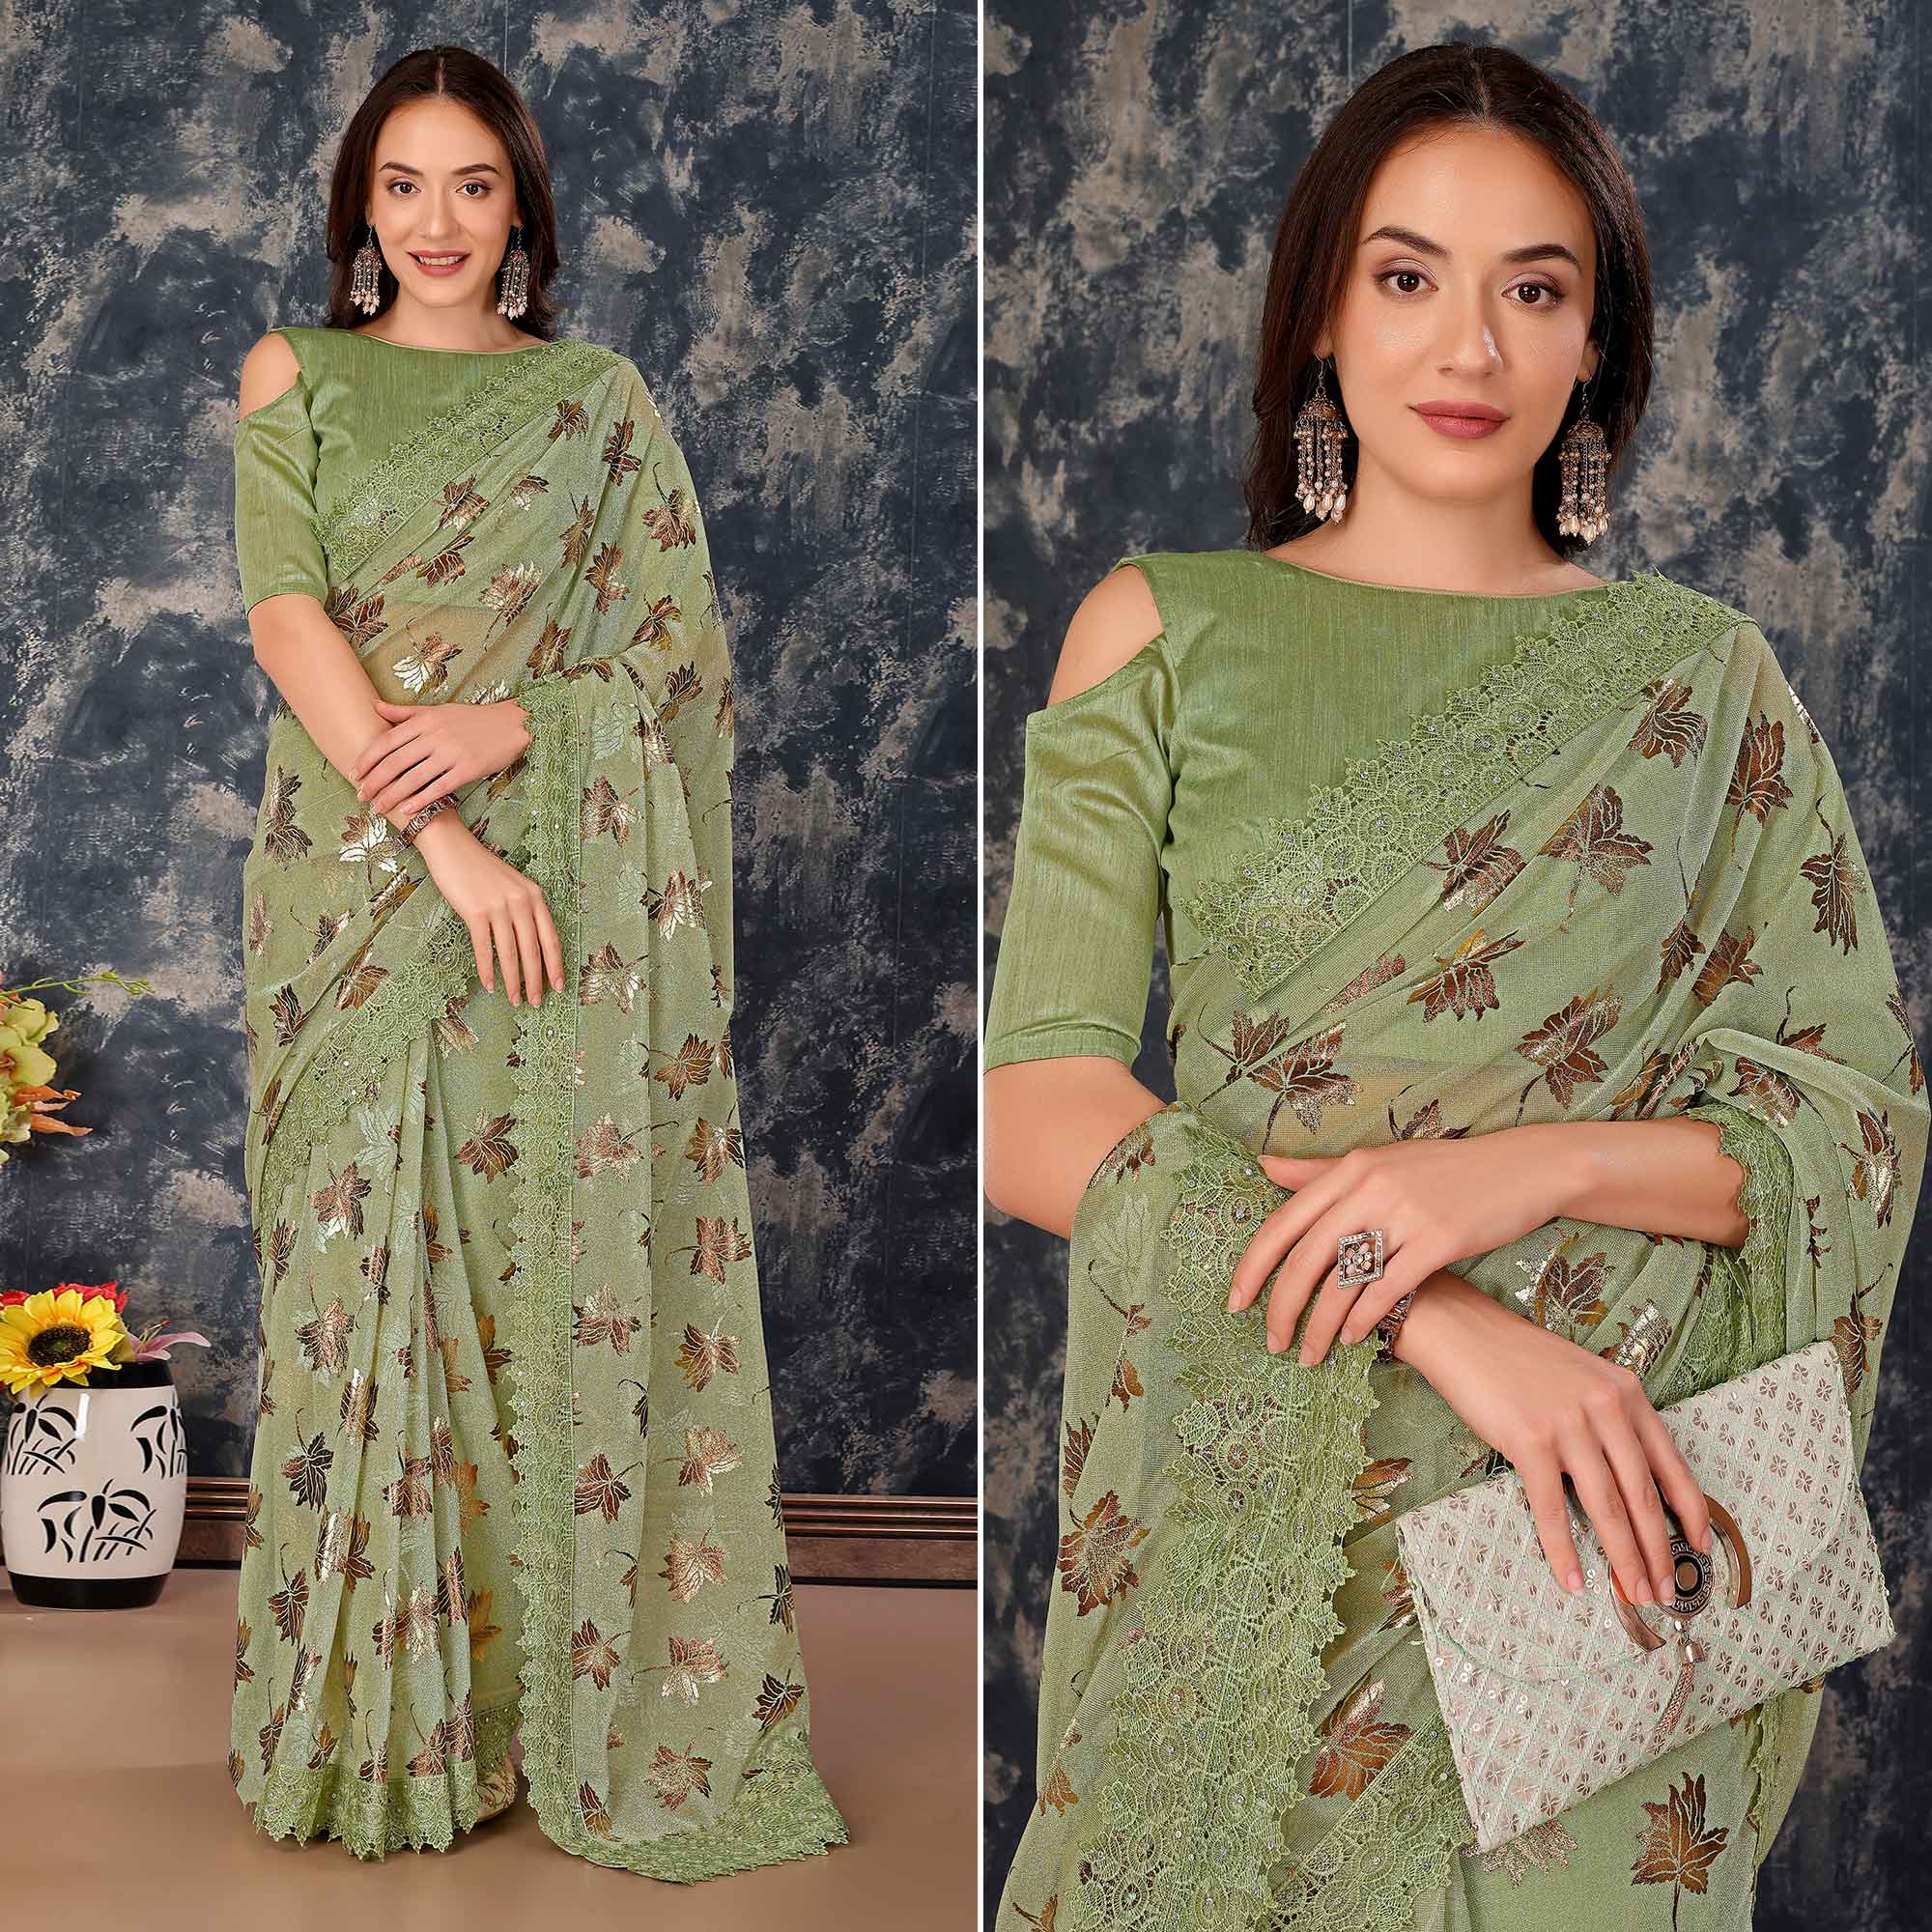 Green Foil Printed Lycra Saree With Embroidered Lace Border